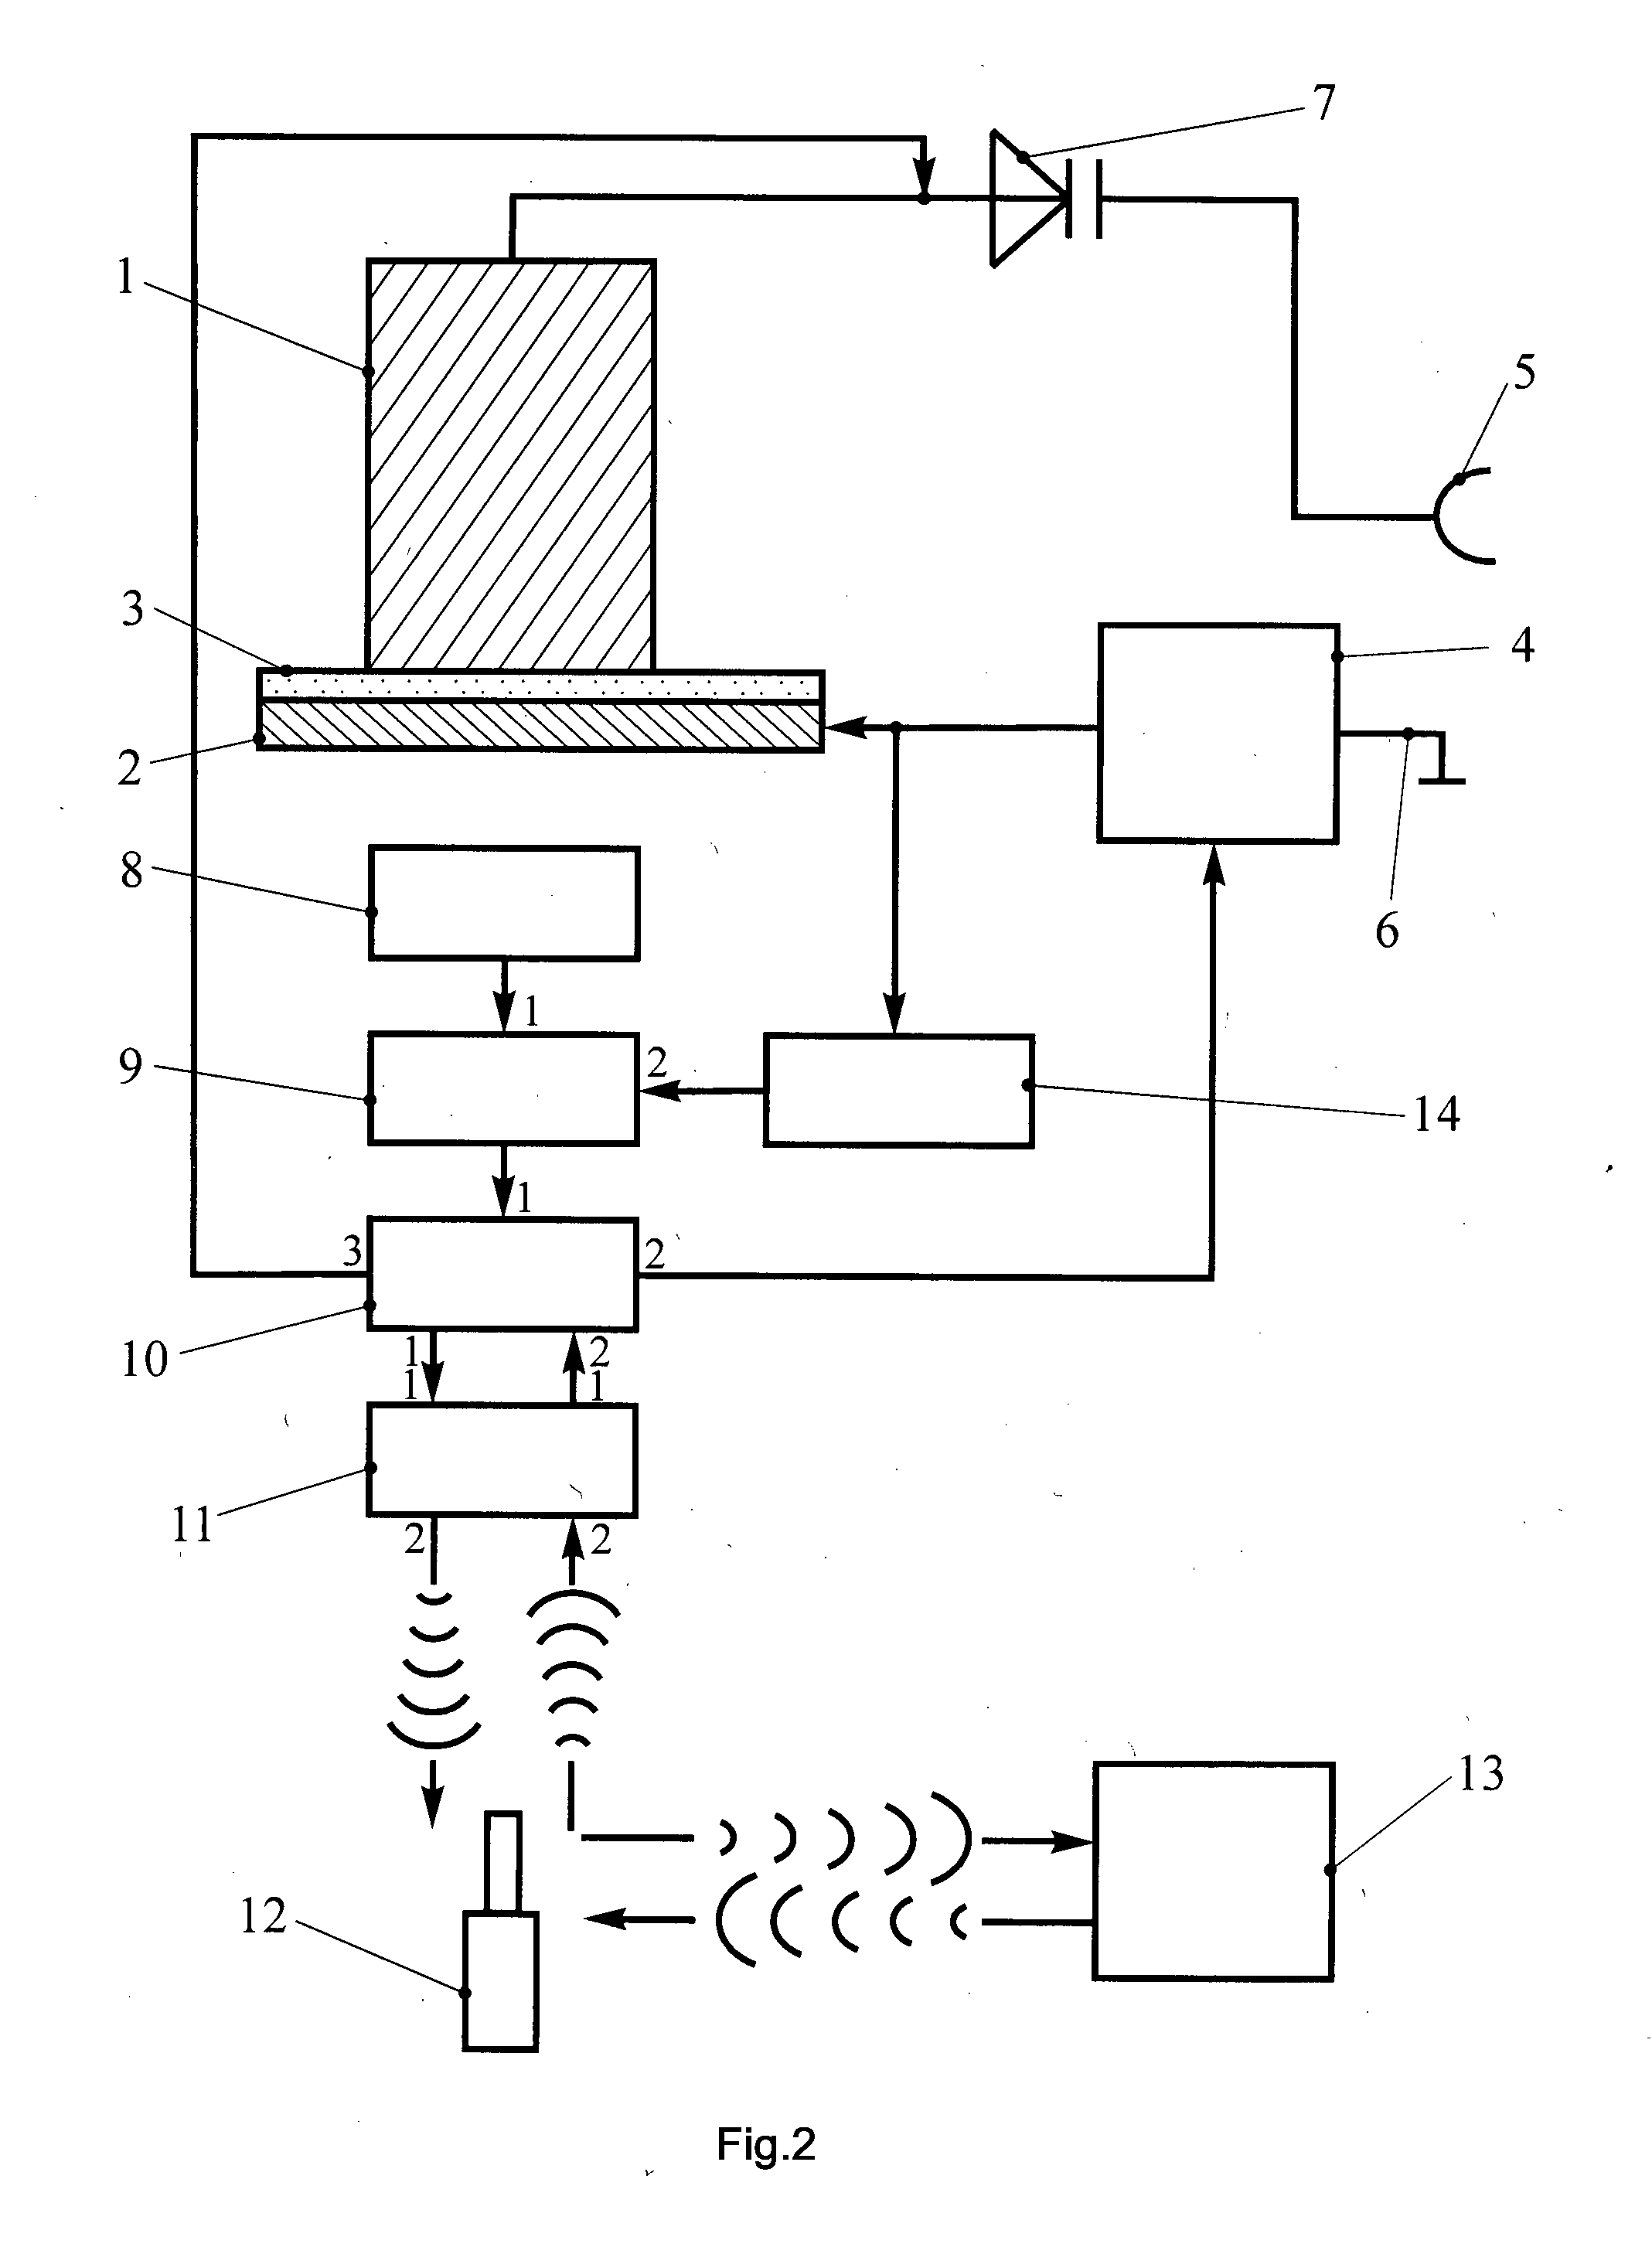 Device for Measuring Electromagnetic Field Intensity